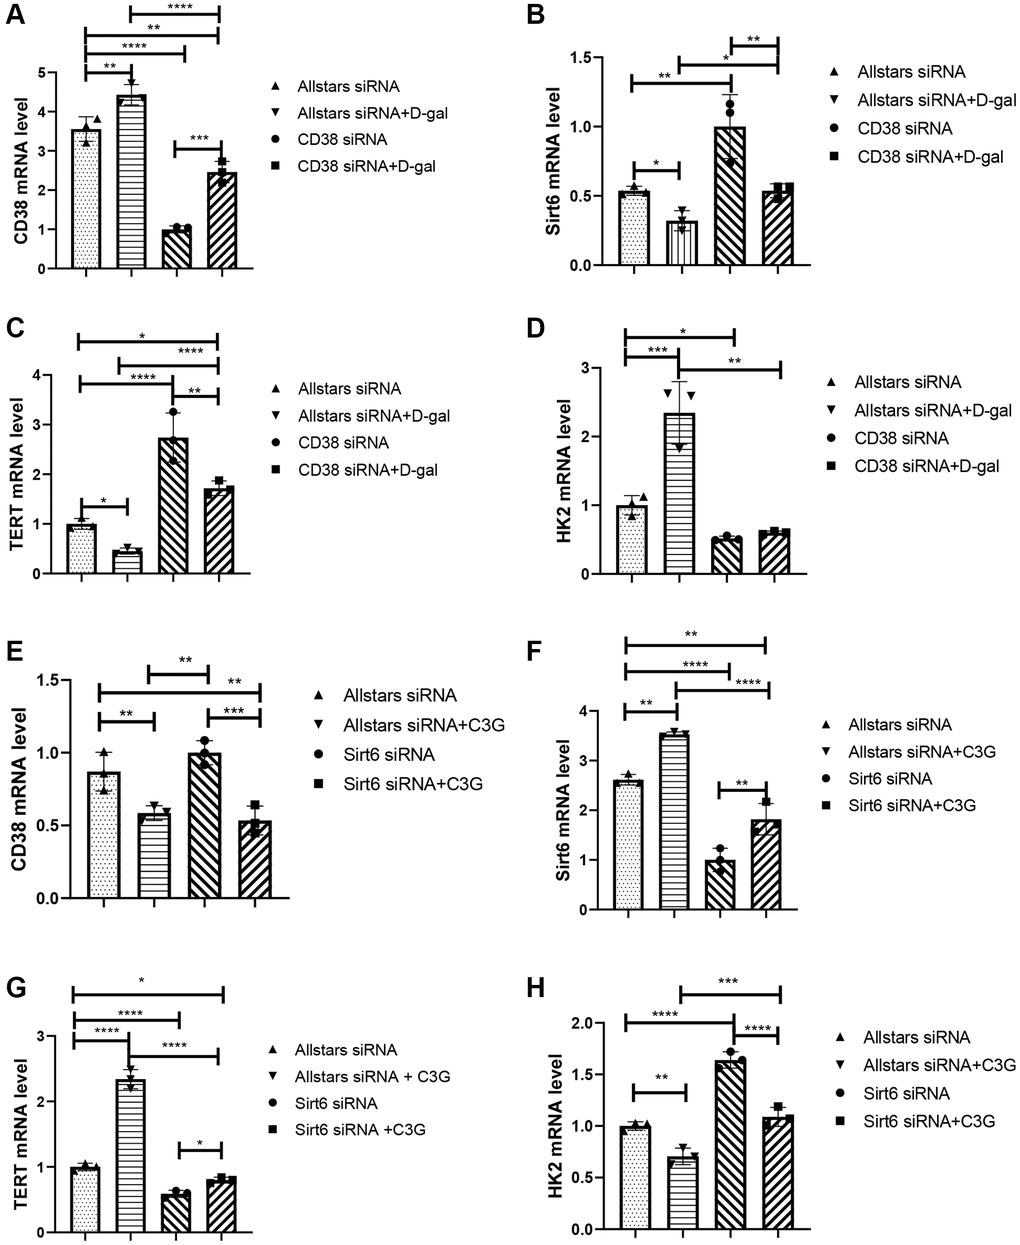 Treatment with CD38 siRNA and C3G decreased HK2 mRNA expression and increased Sirt6 and TERT expression in H9c2 cells, and Sirt6 siRNA and D-gal treatment increased HK2 expression and deceased TERT expression. Real-time PCR was used to detect the CD38 mRNA level (A), Sirt6 mRNA level (B), TERT mRNA level (C), and HK2 mRNA level (D) in cells after CD38 siRNA transfection. Real-time PCR was also performed to detect the CD38 mRNA level (E), Sirt6 mRNA level (F), TERT mRNA level (G), and HK2 mRNA level (H) in cells after Sirt6 siRNA transfection. *P **P ***P ****P 